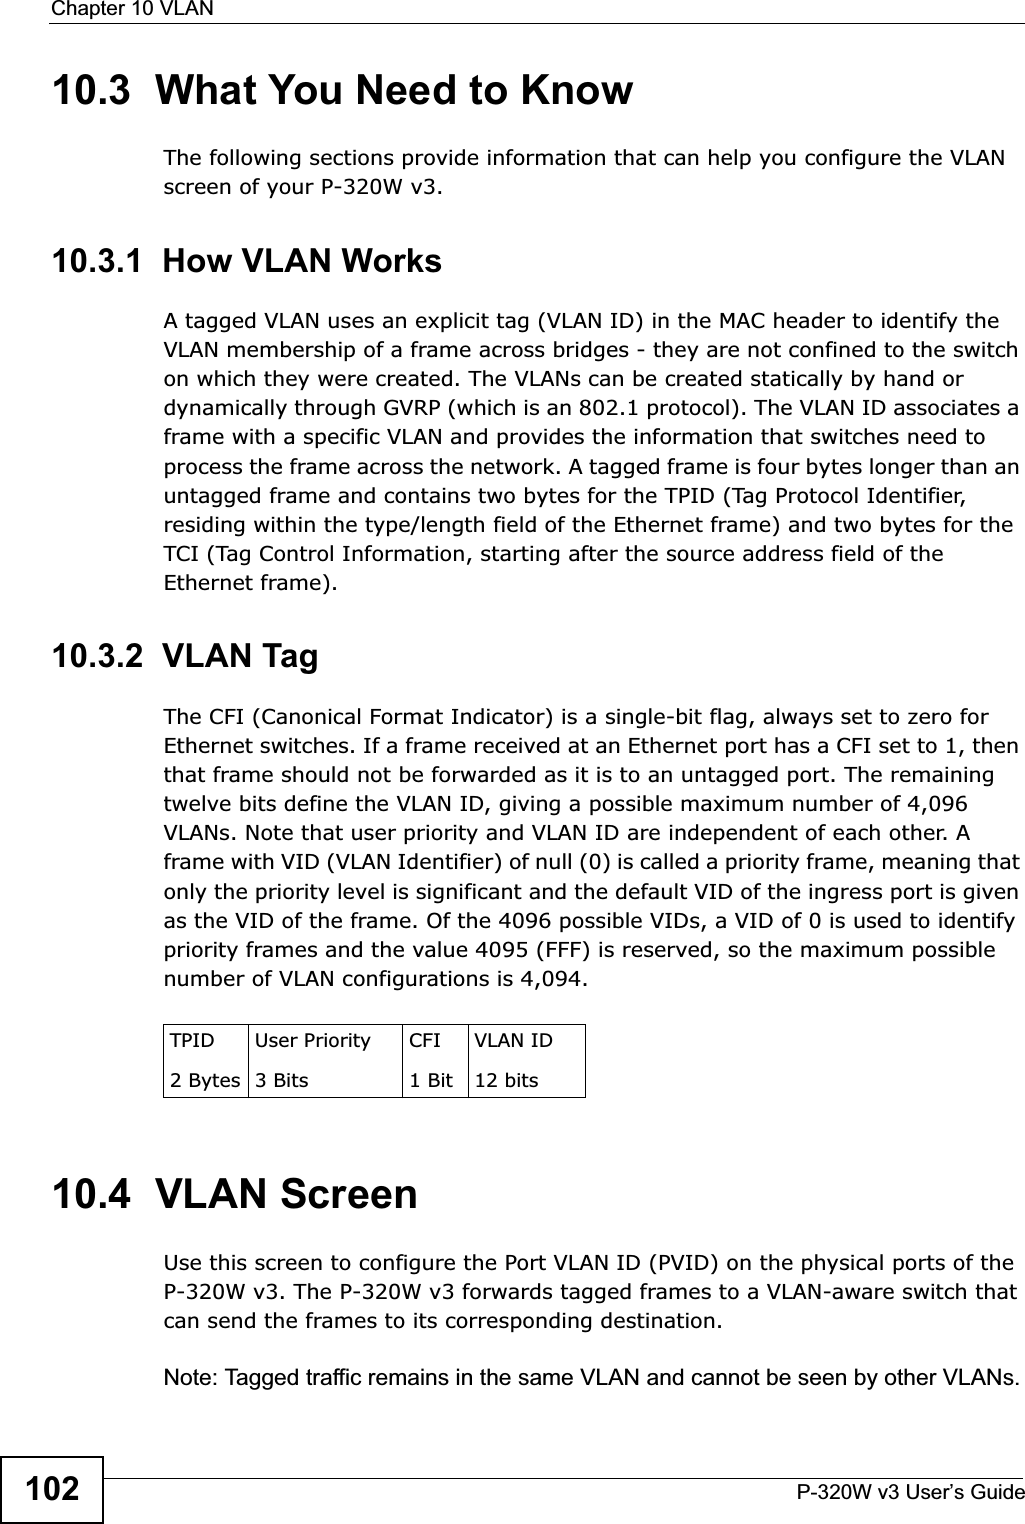 Chapter 10 VLANP-320W v3 User’s Guide10210.3  What You Need to KnowThe following sections provide information that can help you configure the VLAN screen of your P-320W v3.10.3.1  How VLAN WorksA tagged VLAN uses an explicit tag (VLAN ID) in the MAC header to identify the VLAN membership of a frame across bridges - they are not confined to the switch on which they were created. The VLANs can be created statically by hand or dynamically through GVRP (which is an 802.1 protocol). The VLAN ID associates a frame with a specific VLAN and provides the information that switches need to process the frame across the network. A tagged frame is four bytes longer than an untagged frame and contains two bytes for the TPID (Tag Protocol Identifier, residing within the type/length field of the Ethernet frame) and two bytes for the TCI (Tag Control Information, starting after the source address field of the Ethernet frame).10.3.2  VLAN Tag The CFI (Canonical Format Indicator) is a single-bit flag, always set to zero for Ethernet switches. If a frame received at an Ethernet port has a CFI set to 1, then that frame should not be forwarded as it is to an untagged port. The remaining twelve bits define the VLAN ID, giving a possible maximum number of 4,096 VLANs. Note that user priority and VLAN ID are independent of each other. A frame with VID (VLAN Identifier) of null (0) is called a priority frame, meaning that only the priority level is significant and the default VID of the ingress port is given as the VID of the frame. Of the 4096 possible VIDs, a VID of 0 is used to identify priority frames and the value 4095 (FFF) is reserved, so the maximum possible number of VLAN configurations is 4,094. 10.4  VLAN ScreenUse this screen to configure the Port VLAN ID (PVID) on the physical ports of the P-320W v3. The P-320W v3 forwards tagged frames to a VLAN-aware switch that can send the frames to its corresponding destination.Note: Tagged traffic remains in the same VLAN and cannot be seen by other VLANs.TPID 2 BytesUser Priority 3 BitsCFI1 BitVLAN ID12 bits